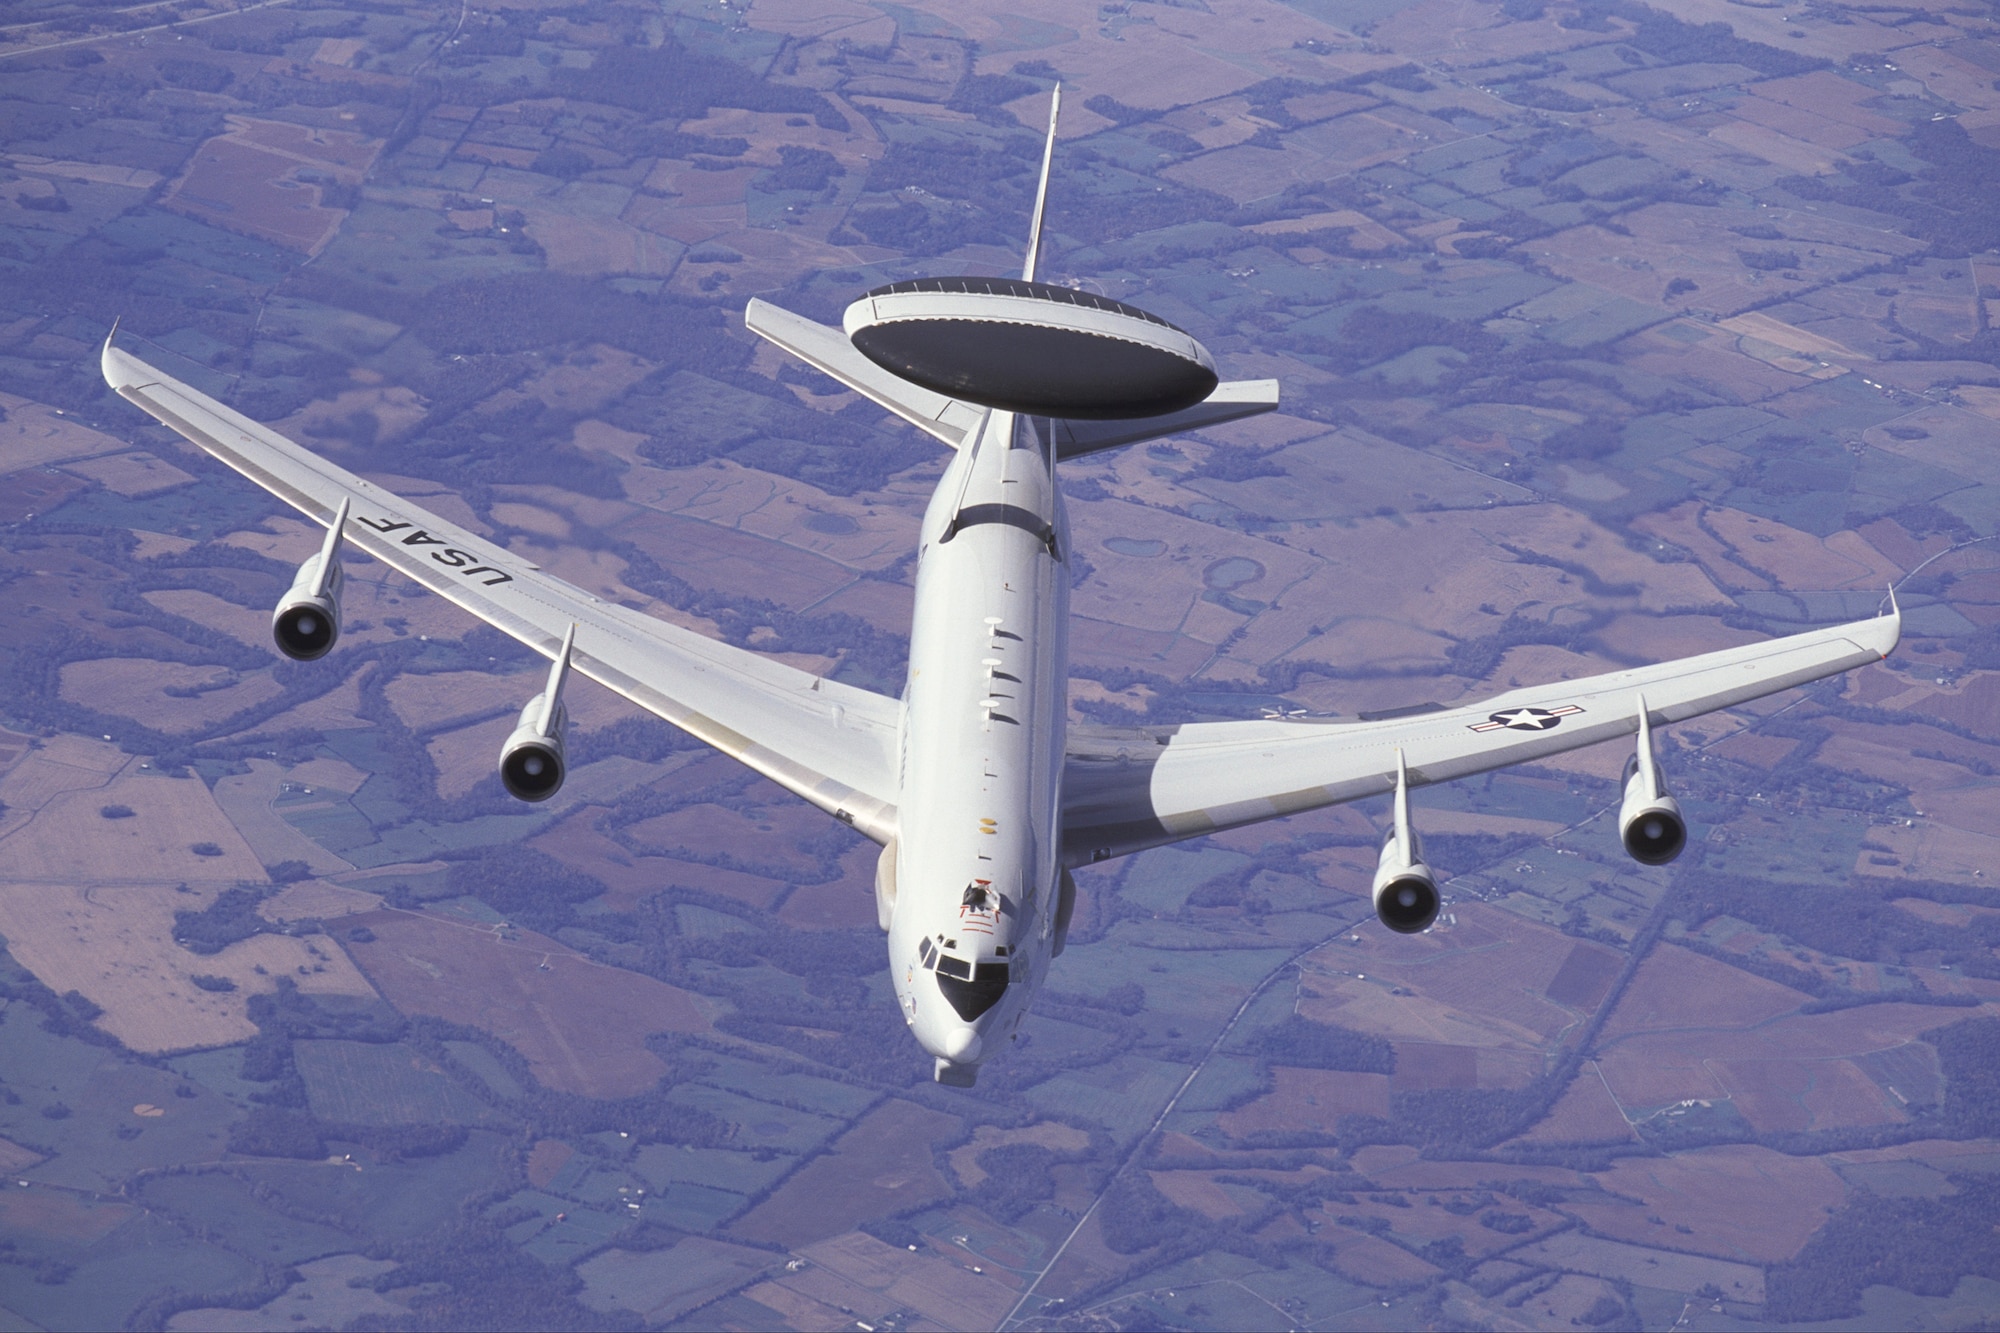 Overall view of a 552nd Air Control Wing E-3C Airborne Warning & Control System (AWACS) aircraft shown over the central United States as it approaches a KC-135R Stratotanker to refuel.  The AWACS aircraft has a large rotating radar mounted above the aircrafts' fuselage and large sensors mounted along the sides of the forward fuselage and below the nose. The E-3C is based at Tinker Air Force Base, Oklahoma. Copyright 2003 Greg L. Davis, Aviation Photojournalist